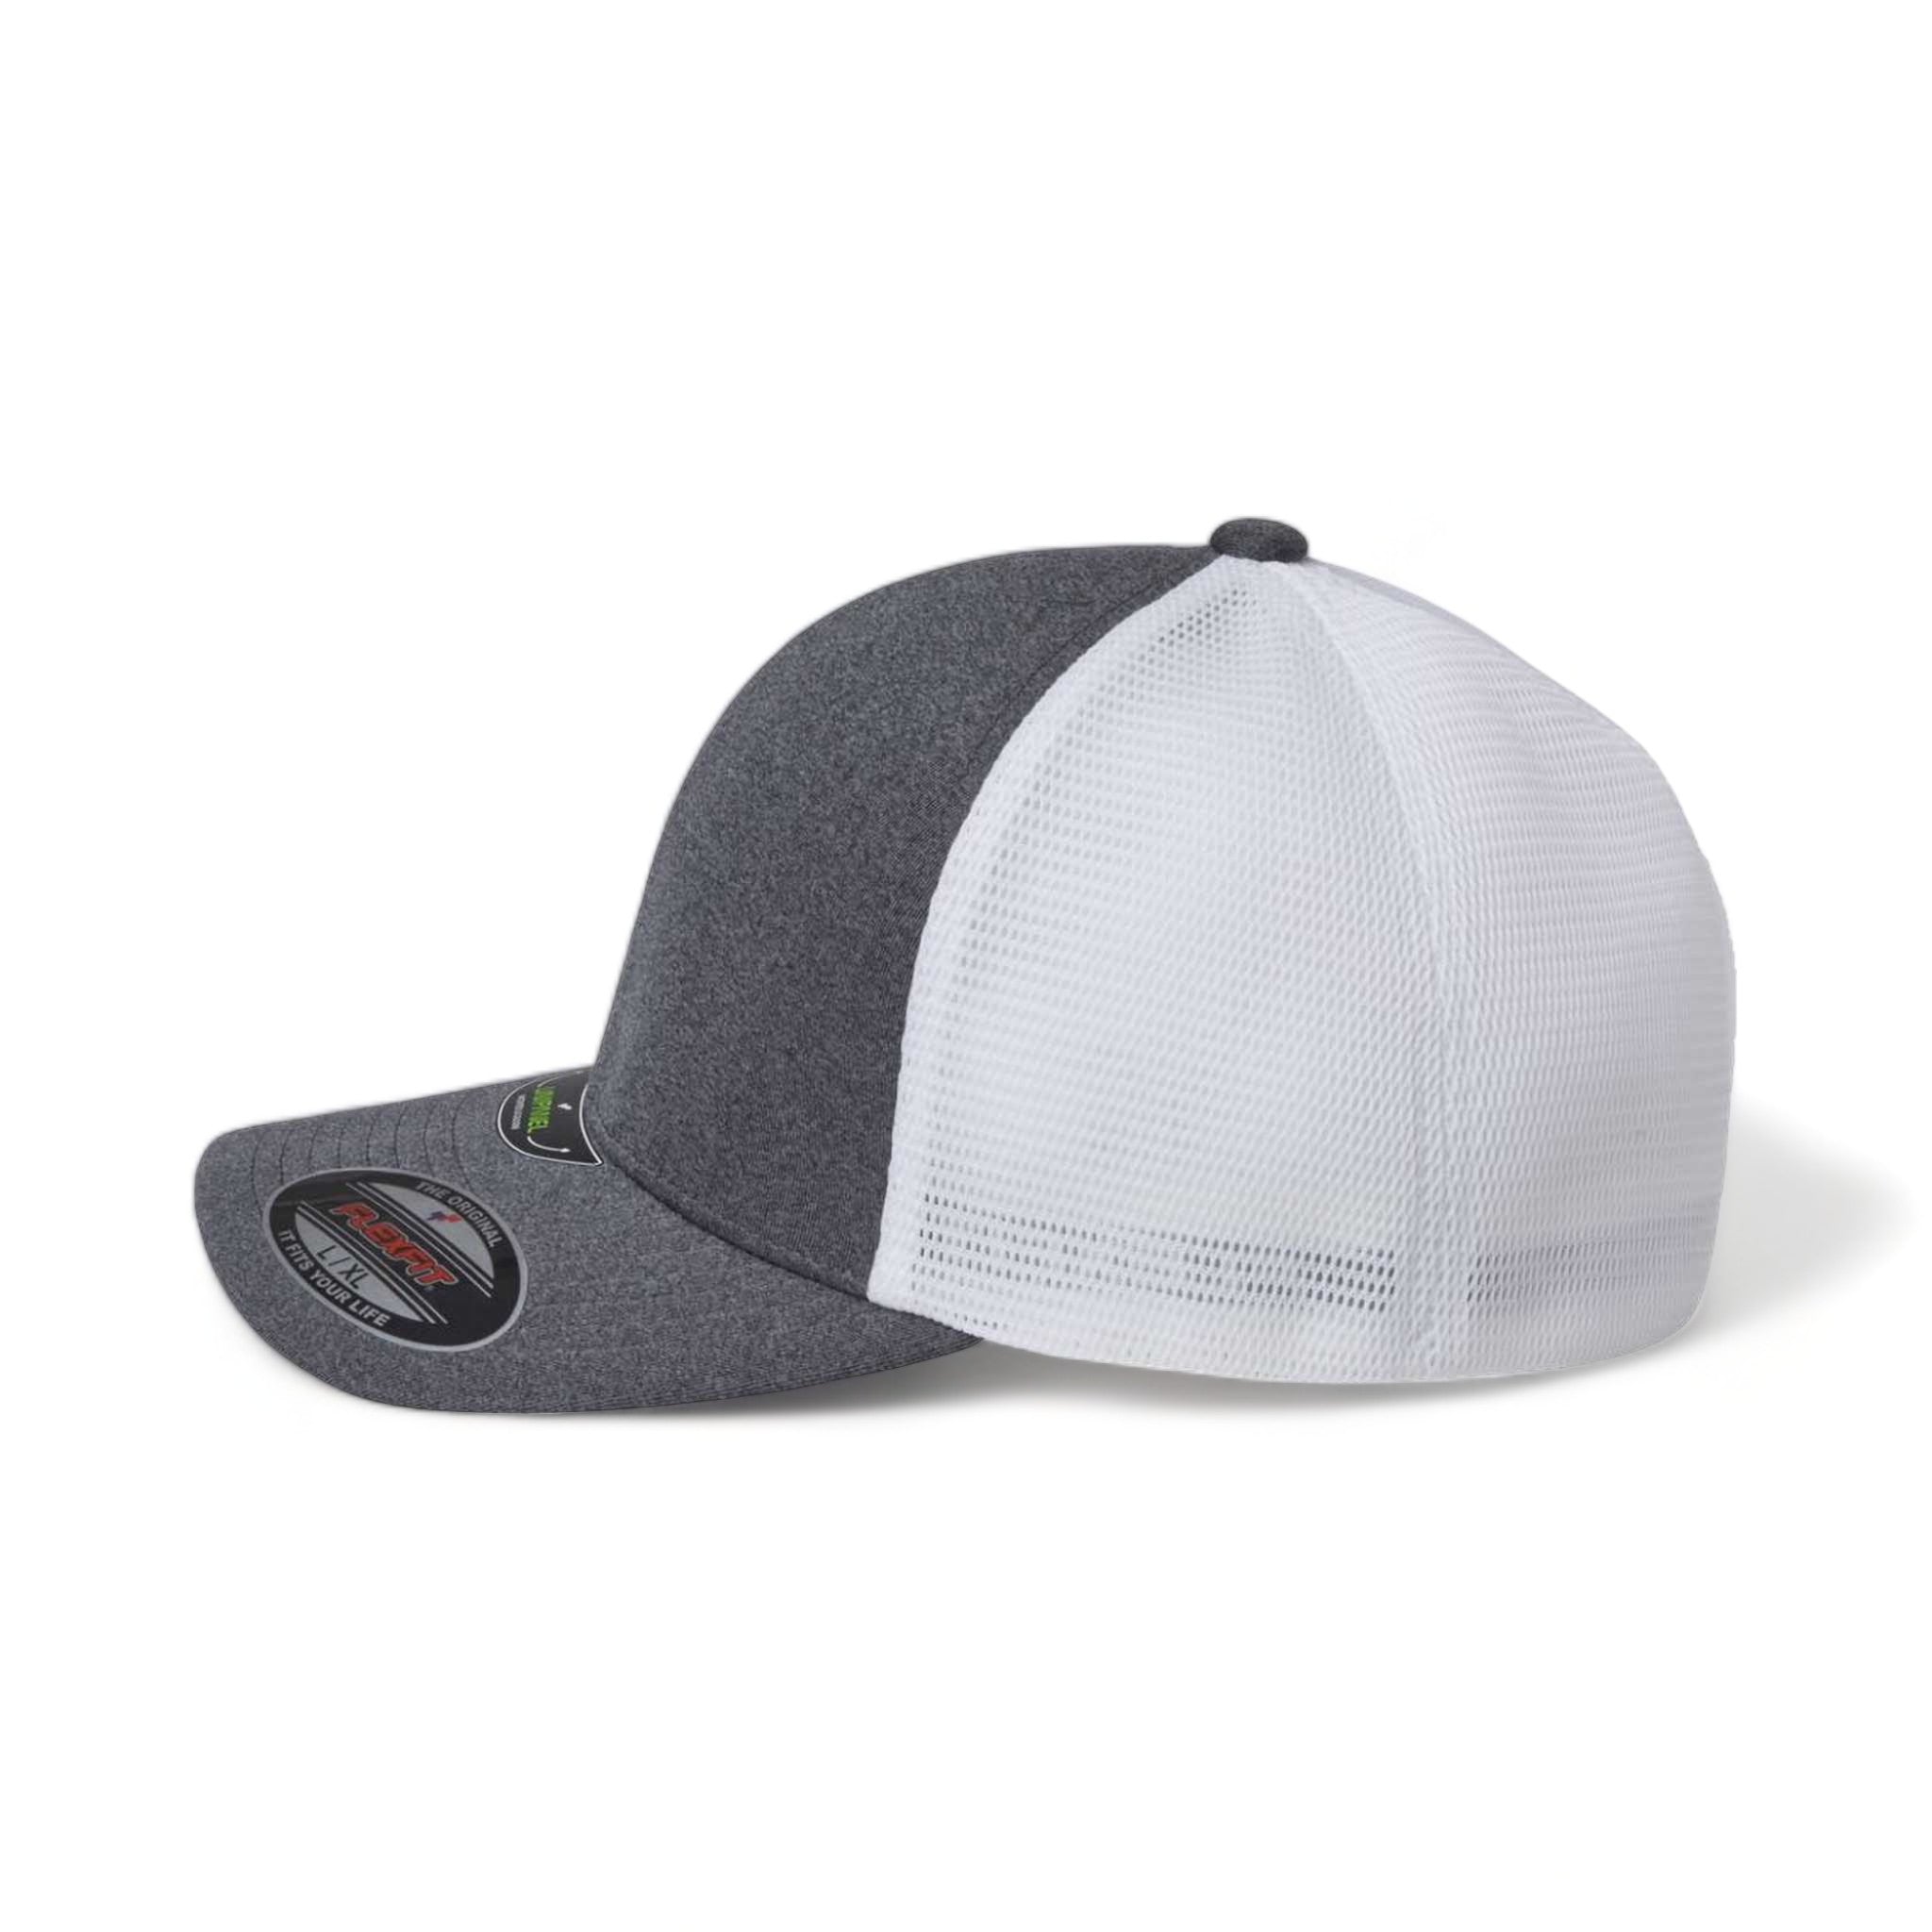 Side view of Flexfit 5511UP custom hat in mélange dark grey and white